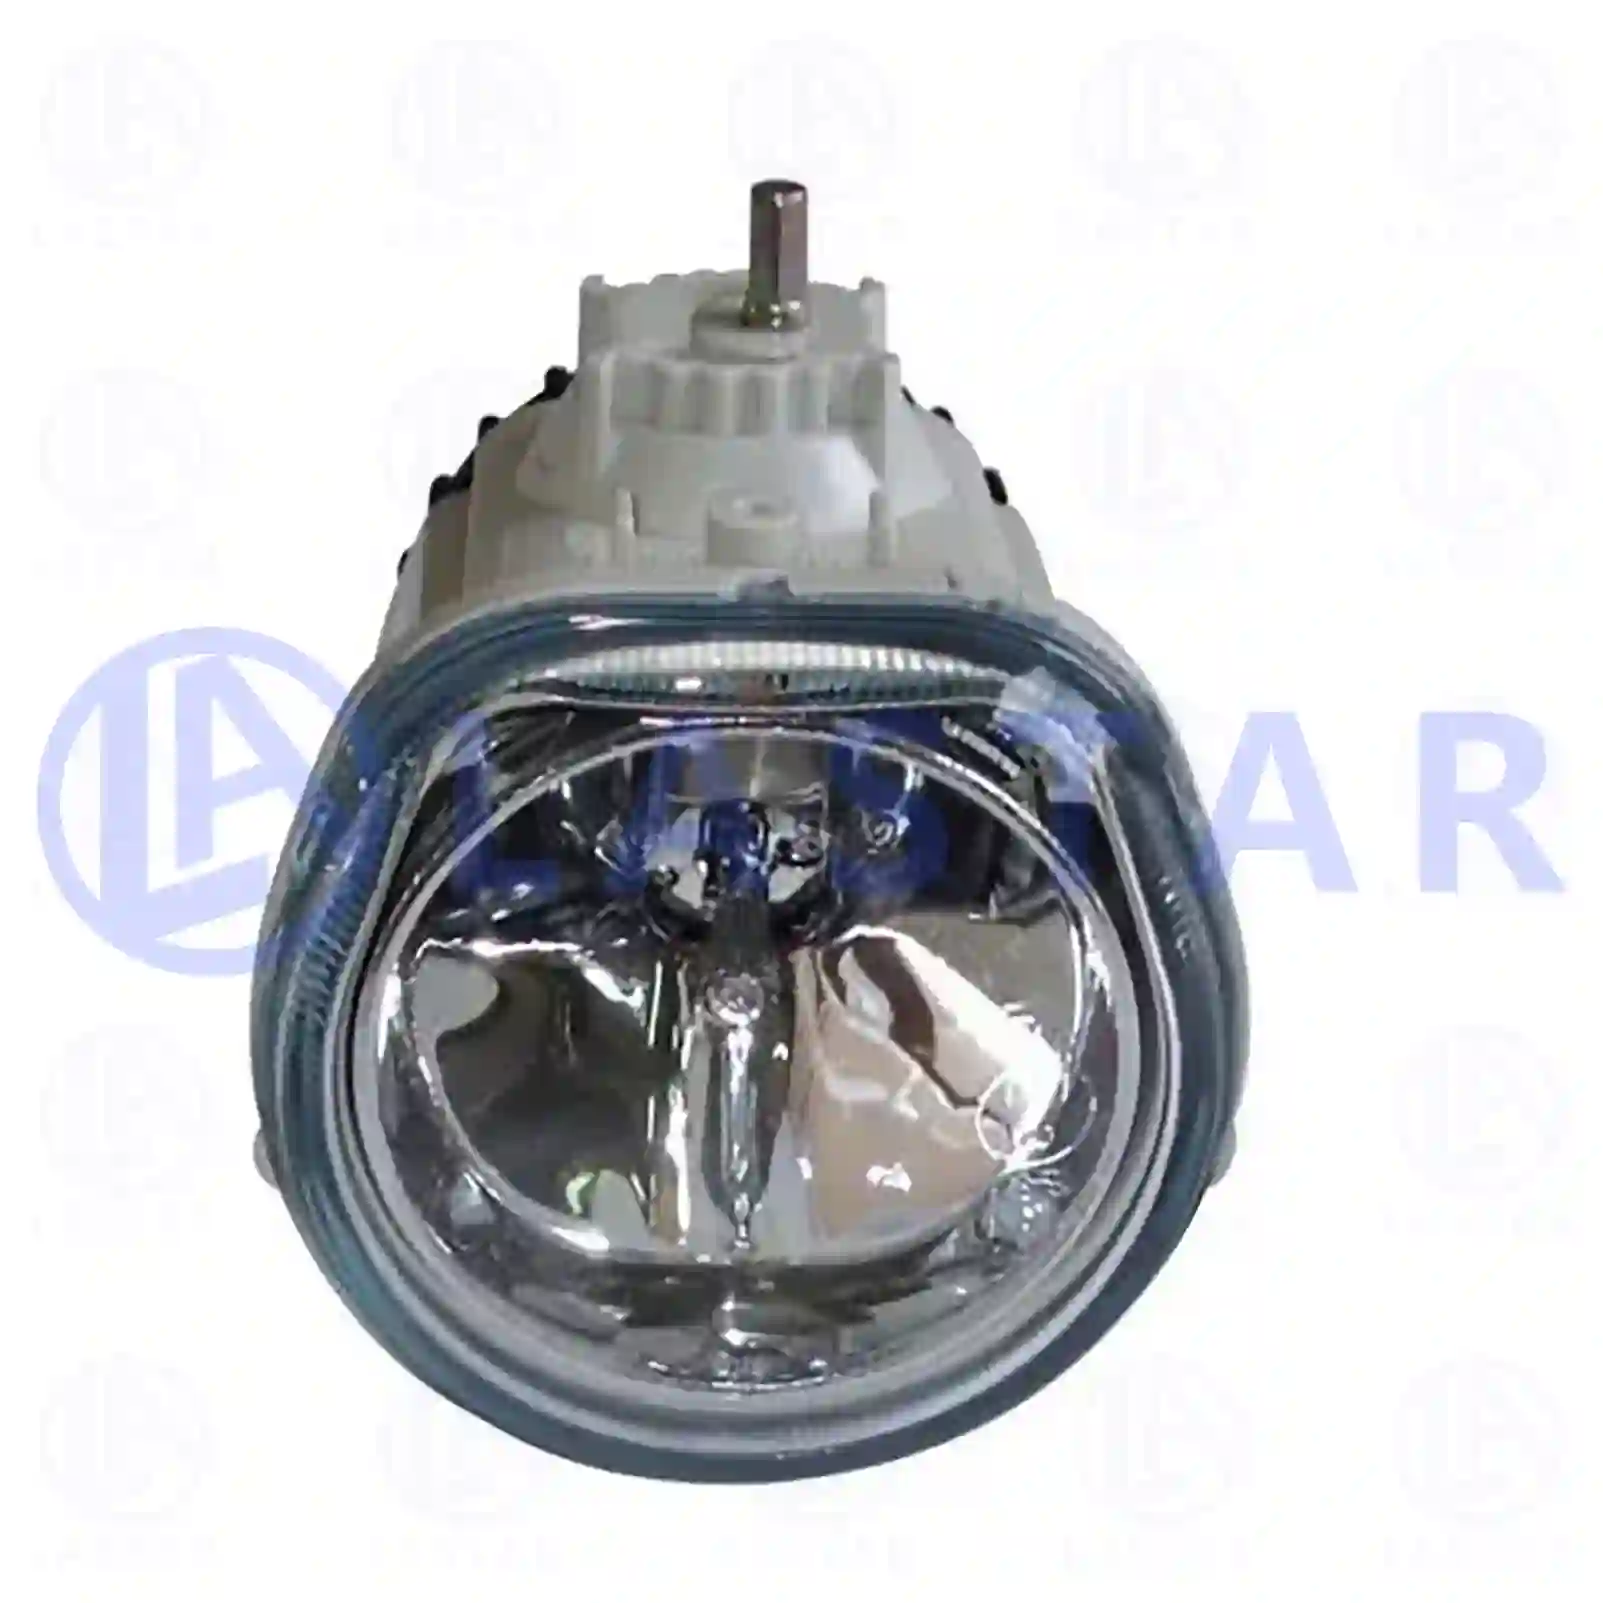 Fog lamp, without bulb, 77712652, 504181095, ZG20433-0008, , ||  77712652 Lastar Spare Part | Truck Spare Parts, Auotomotive Spare Parts Fog lamp, without bulb, 77712652, 504181095, ZG20433-0008, , ||  77712652 Lastar Spare Part | Truck Spare Parts, Auotomotive Spare Parts